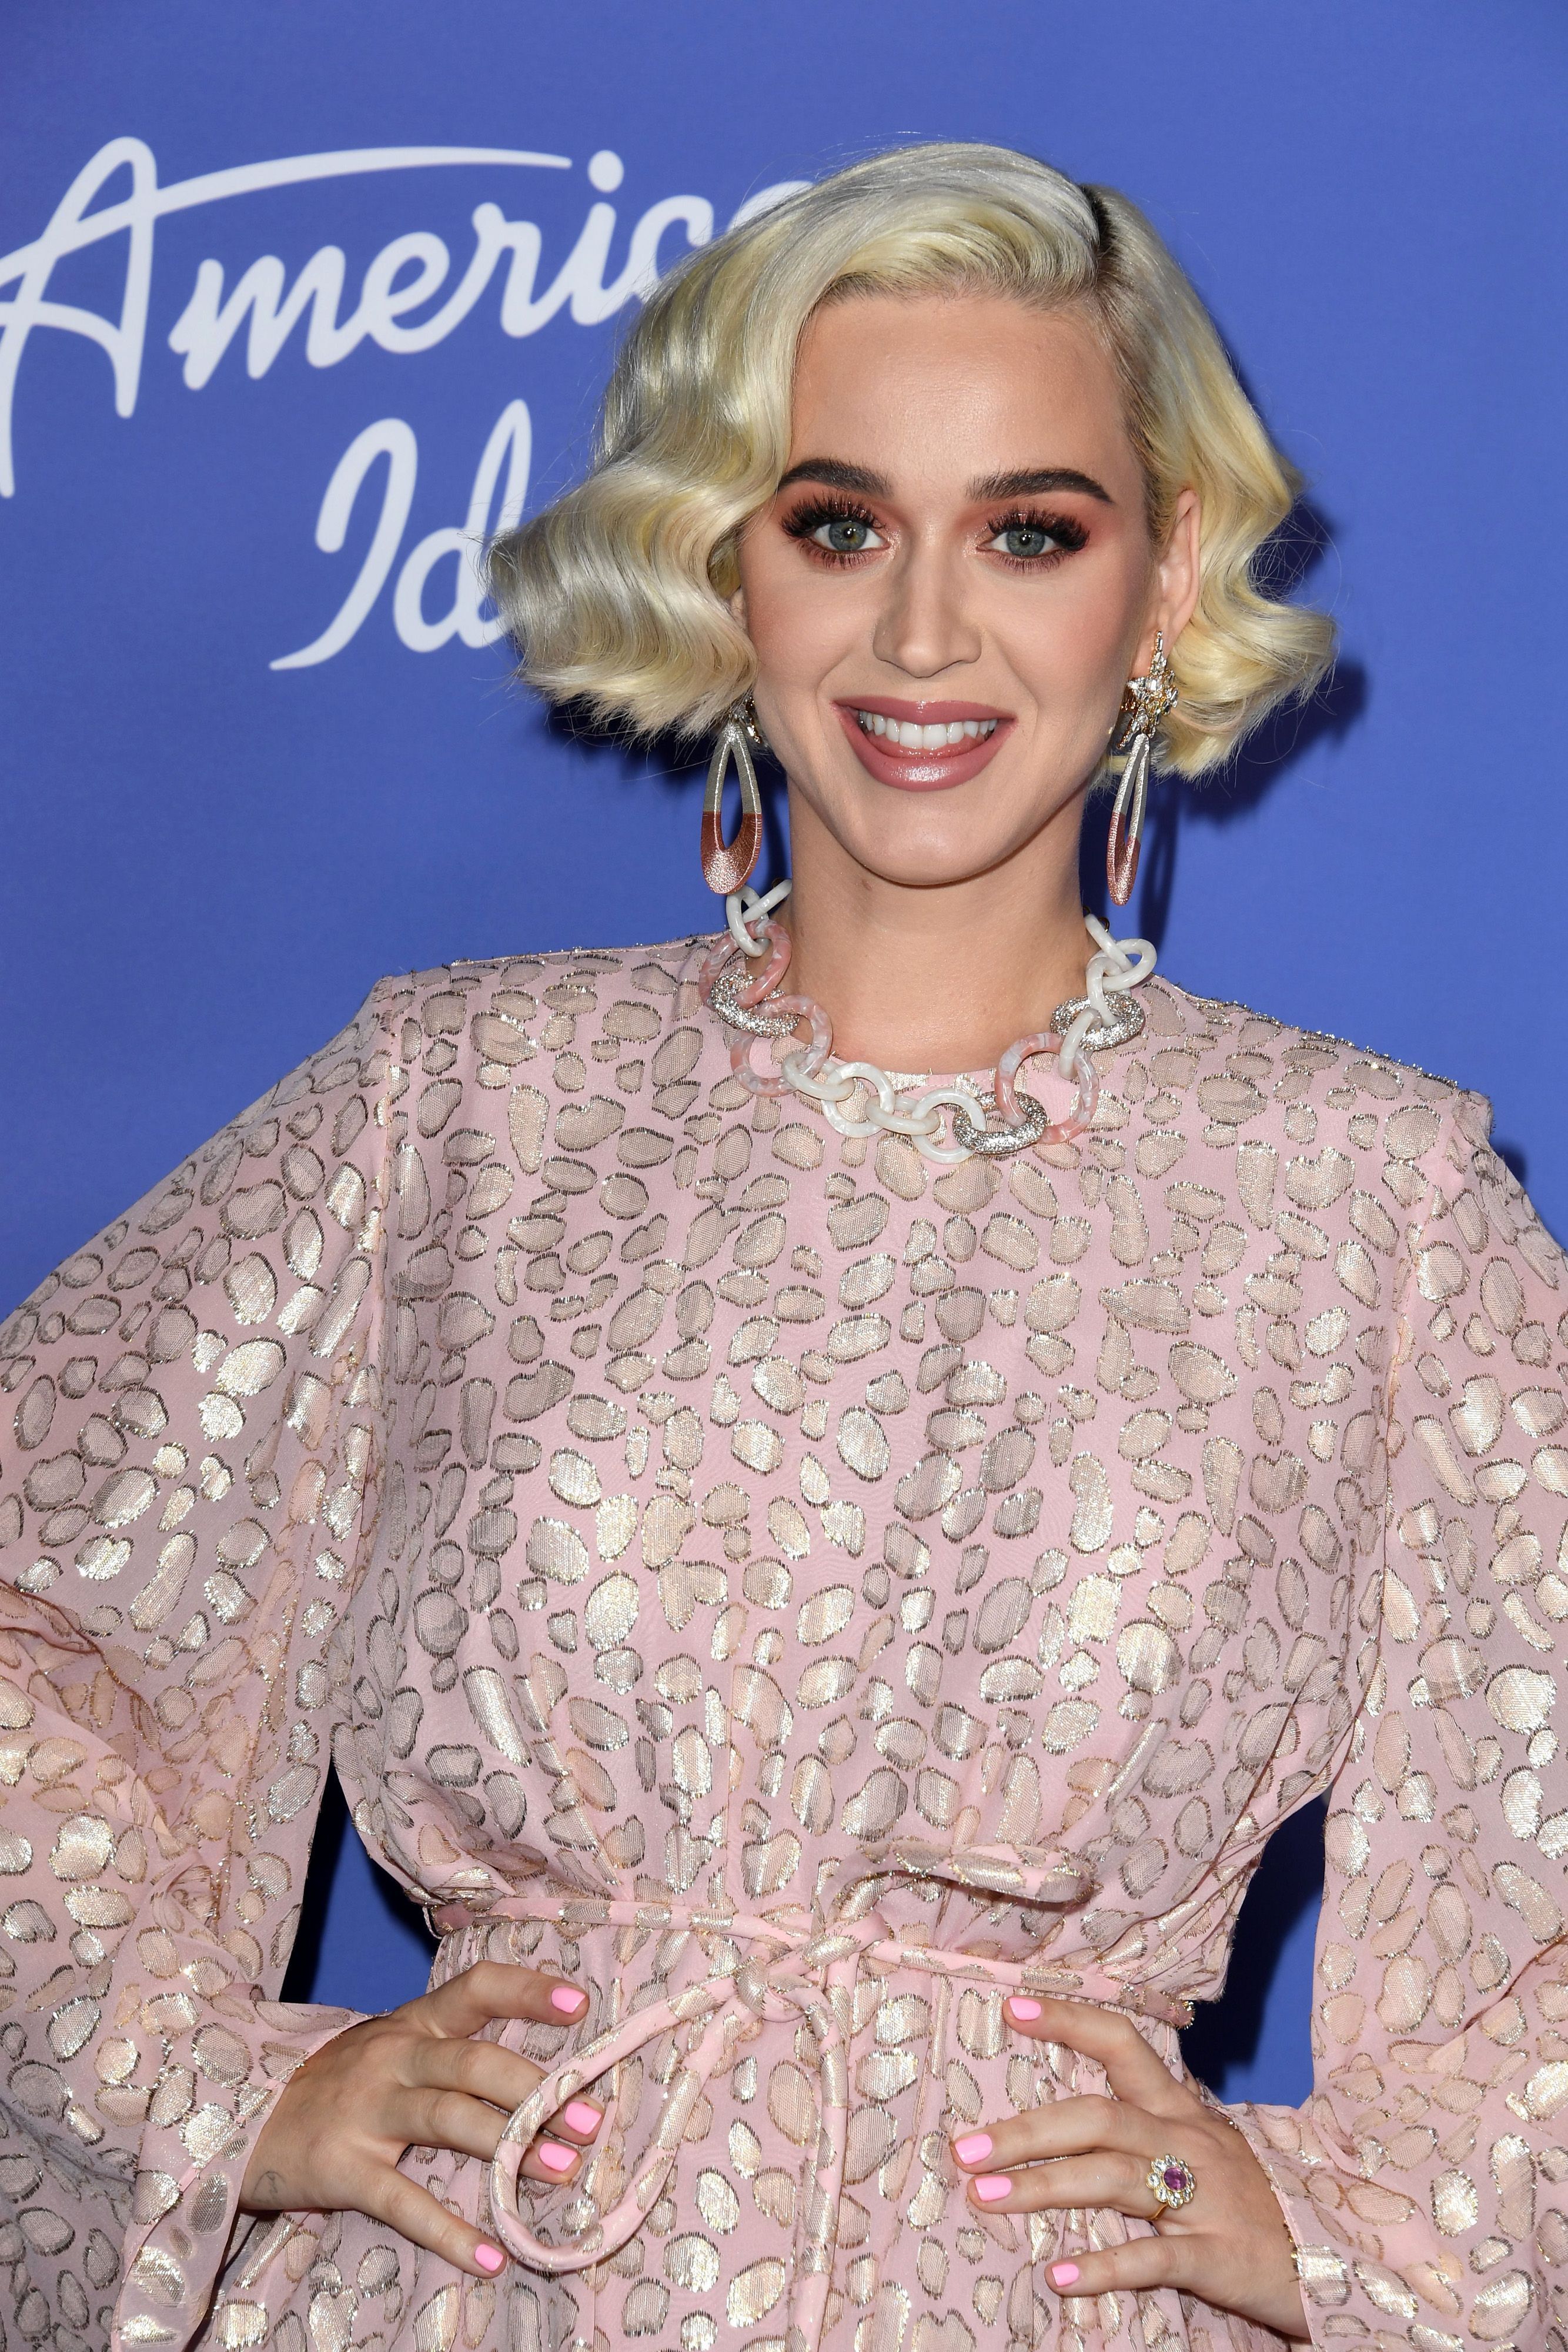 American Idols Katy Perry Shares Her Diet, Workout Routine pic